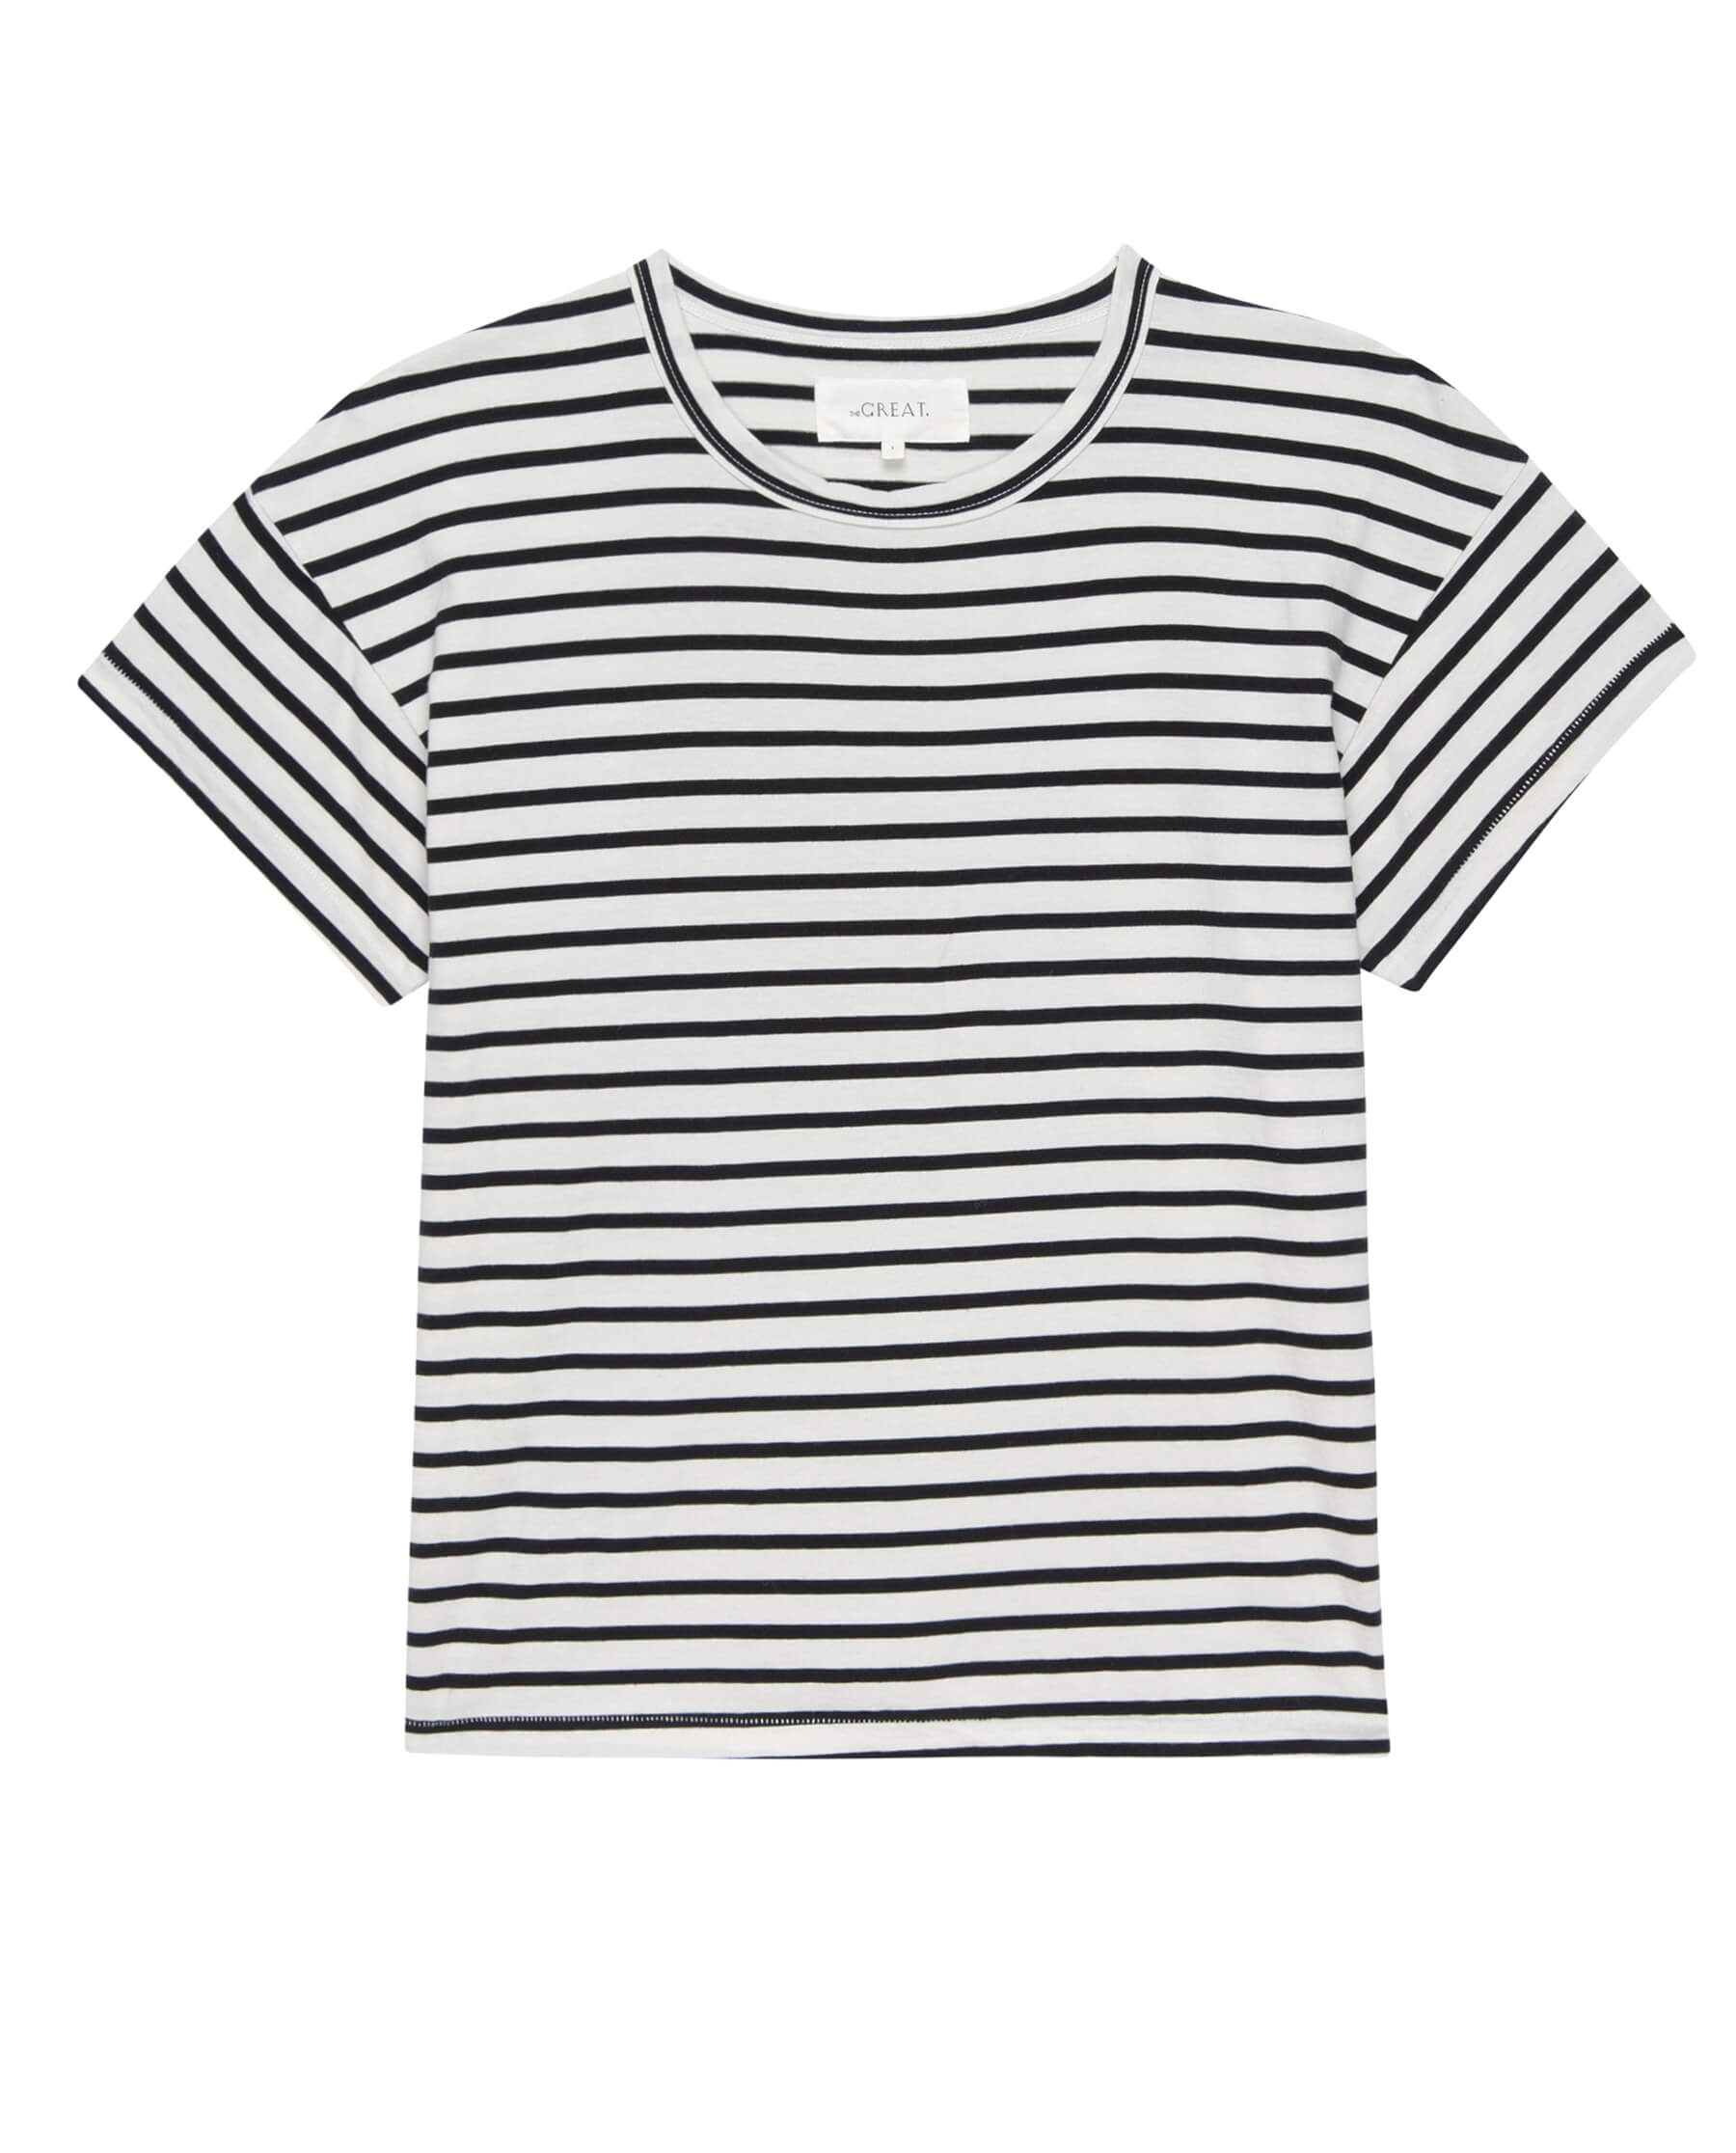 The Boxy Crew. Novelty -- Black and Cream Gondola Stripe TEES THE GREAT. SP24 D2